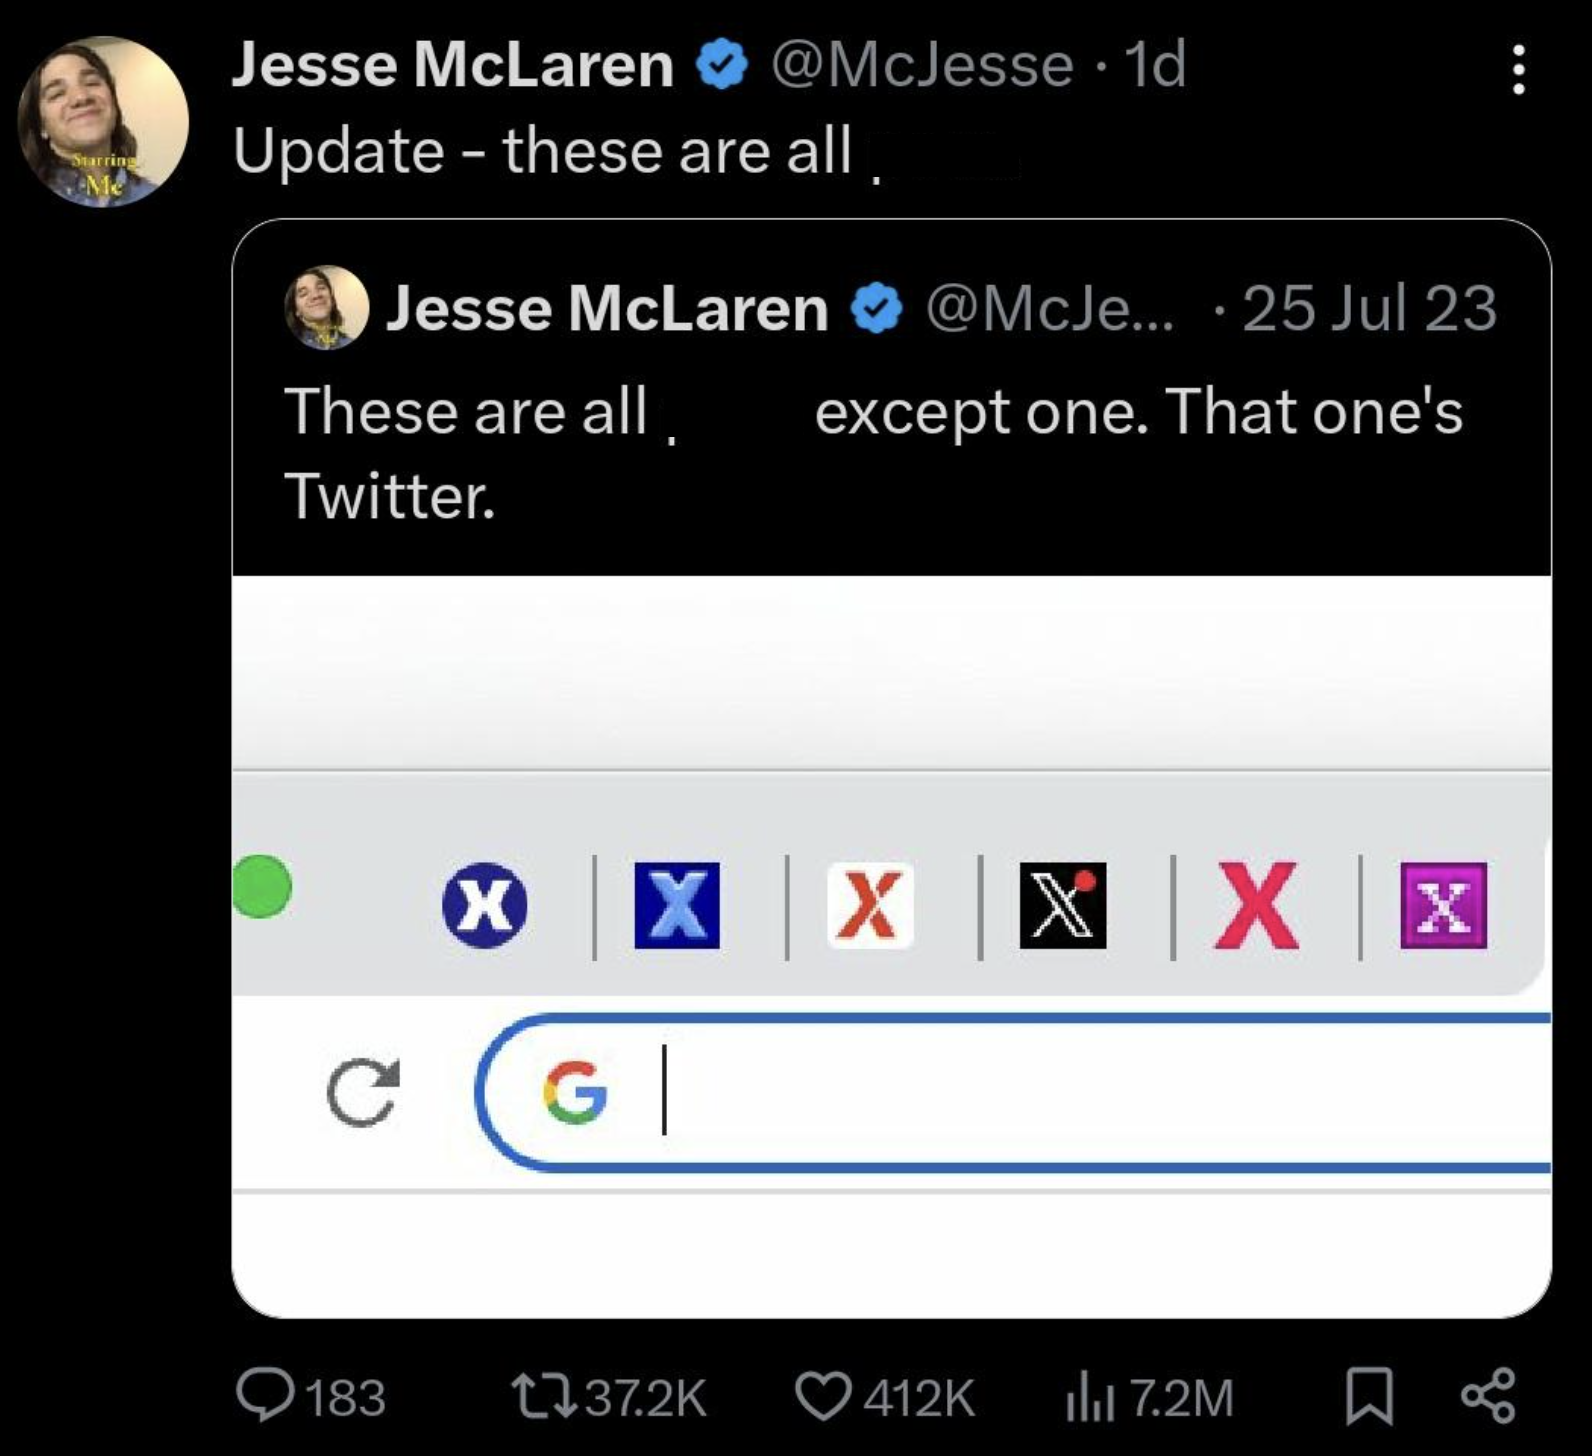 screenshot - Jesse McLaren . 1d Update these are all Jesse McLaren These are all Twitter. ... 25 Jul 23 except one. That one's X X X X X Gi 183 7.2M